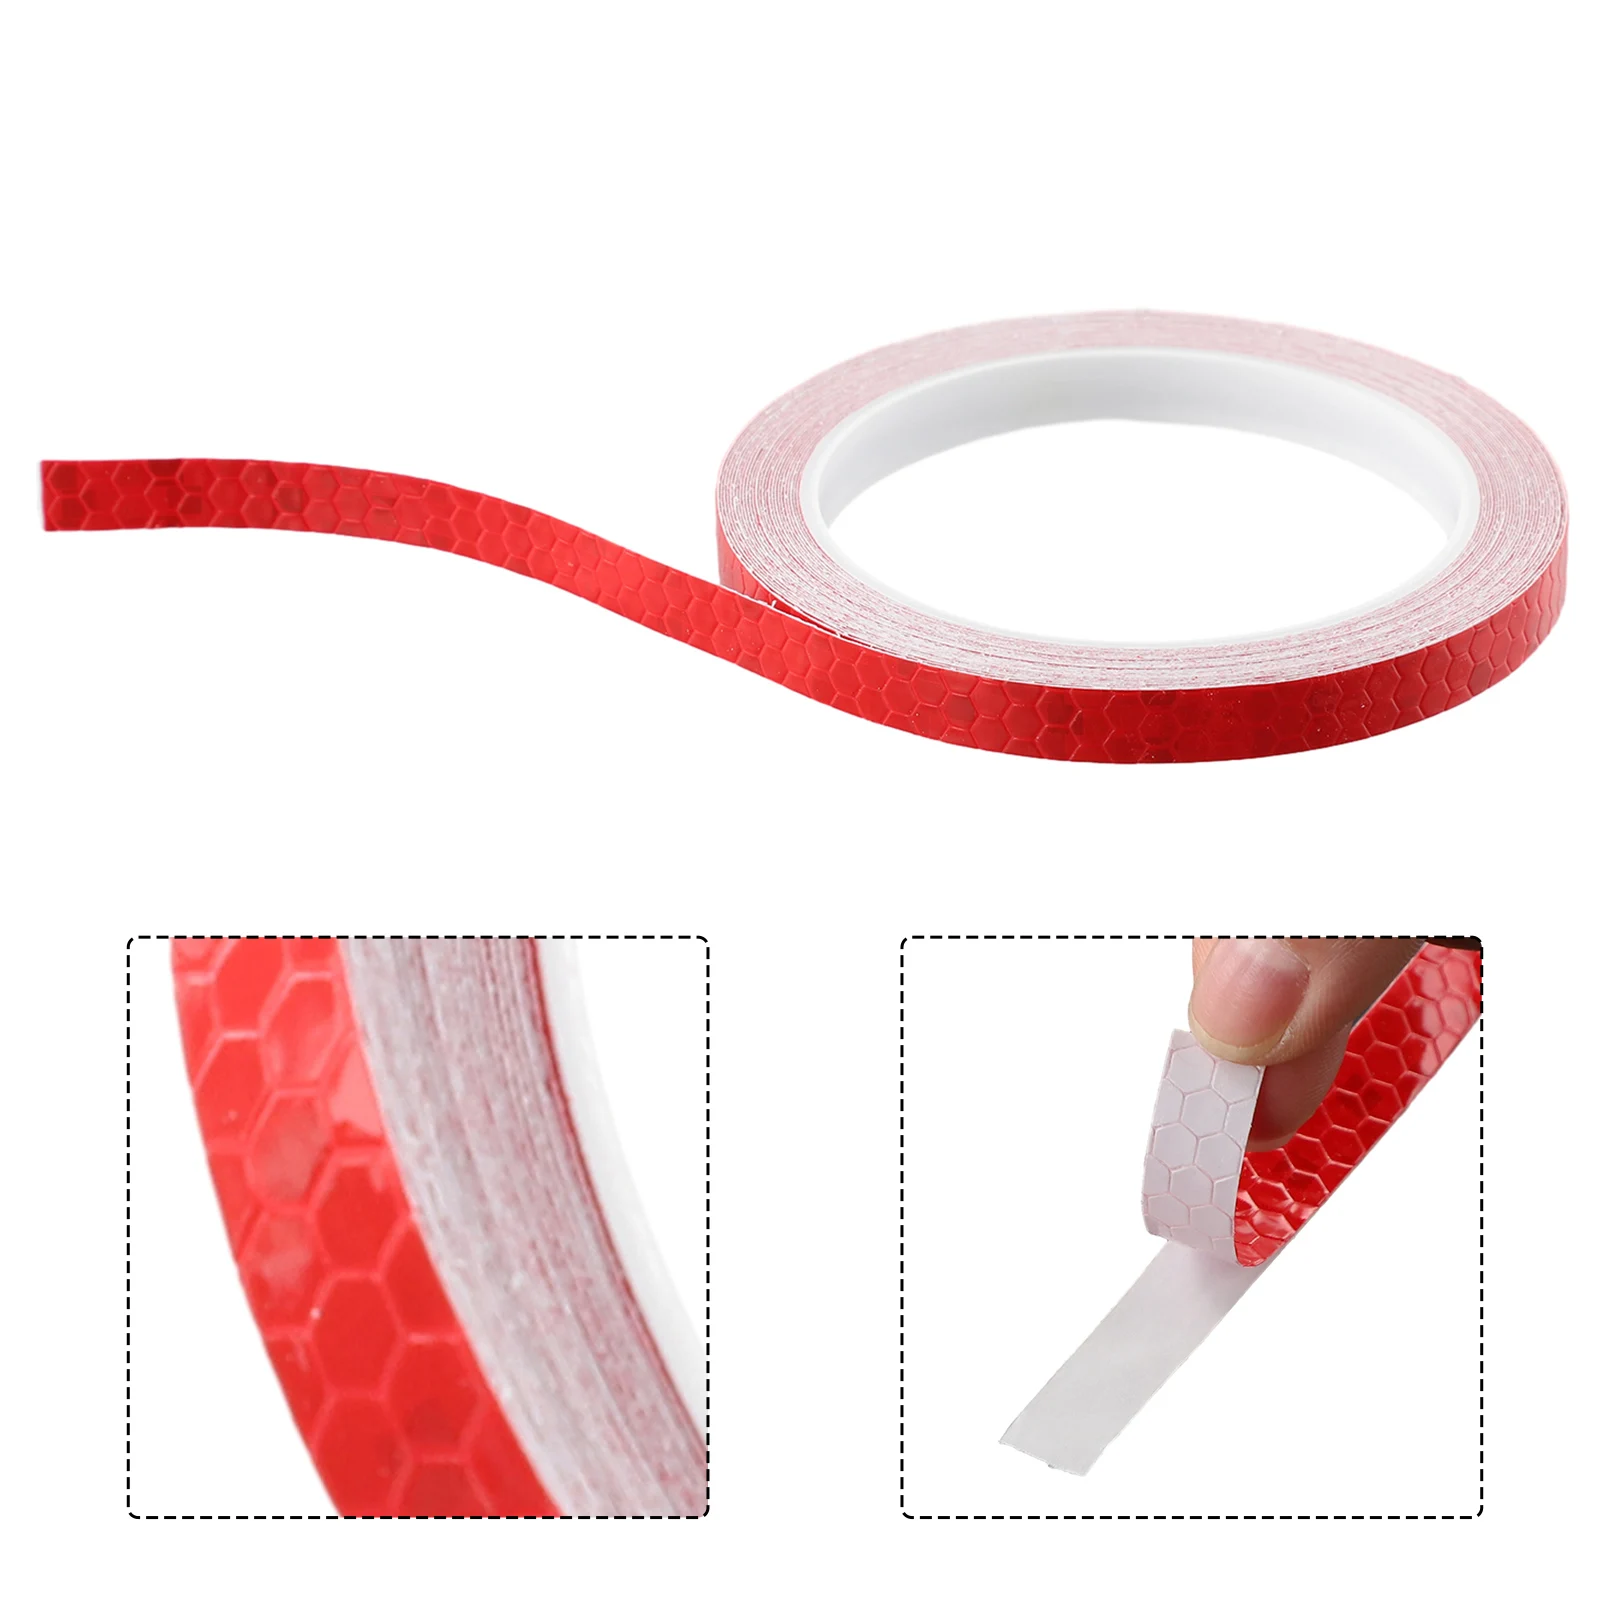 

New Practical Car Sticker Tape Part Reflective Stickers Safety Universal Wear-resistance Wheel Rim 1cm*8m Bicycle